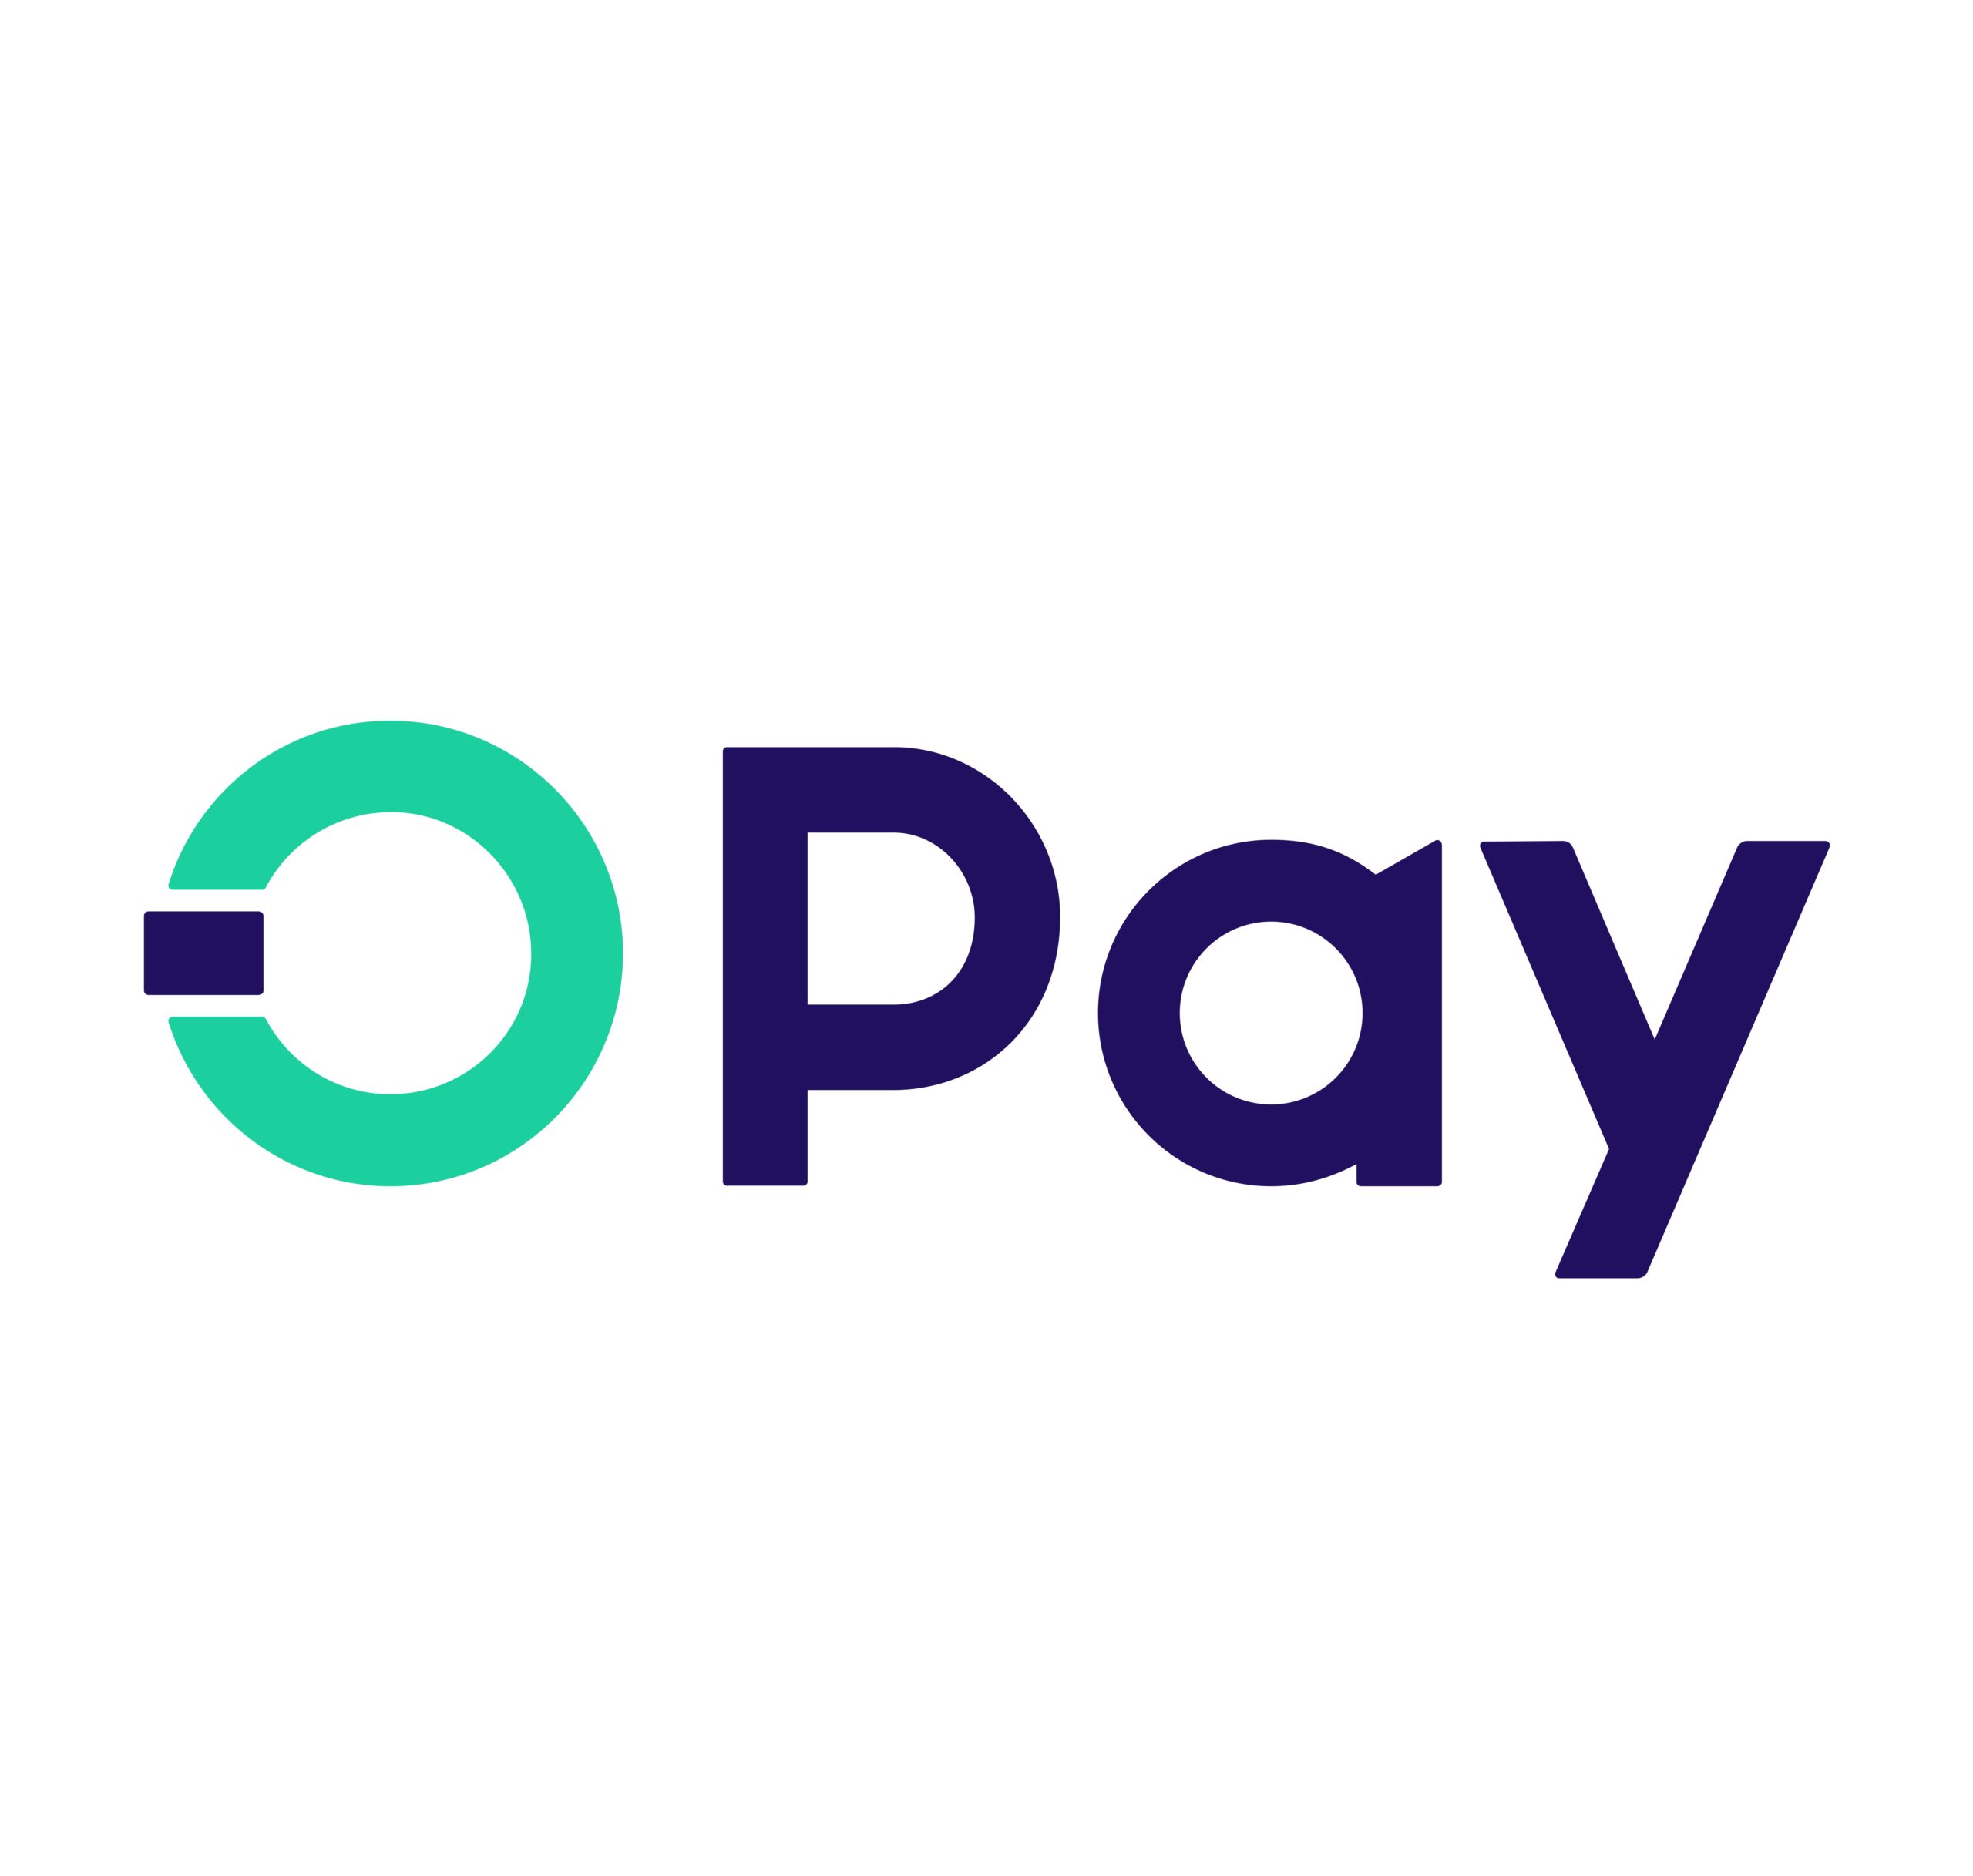 OPay faces scrutiny over weak KYC system: impersonation, account tiers increase purple flags